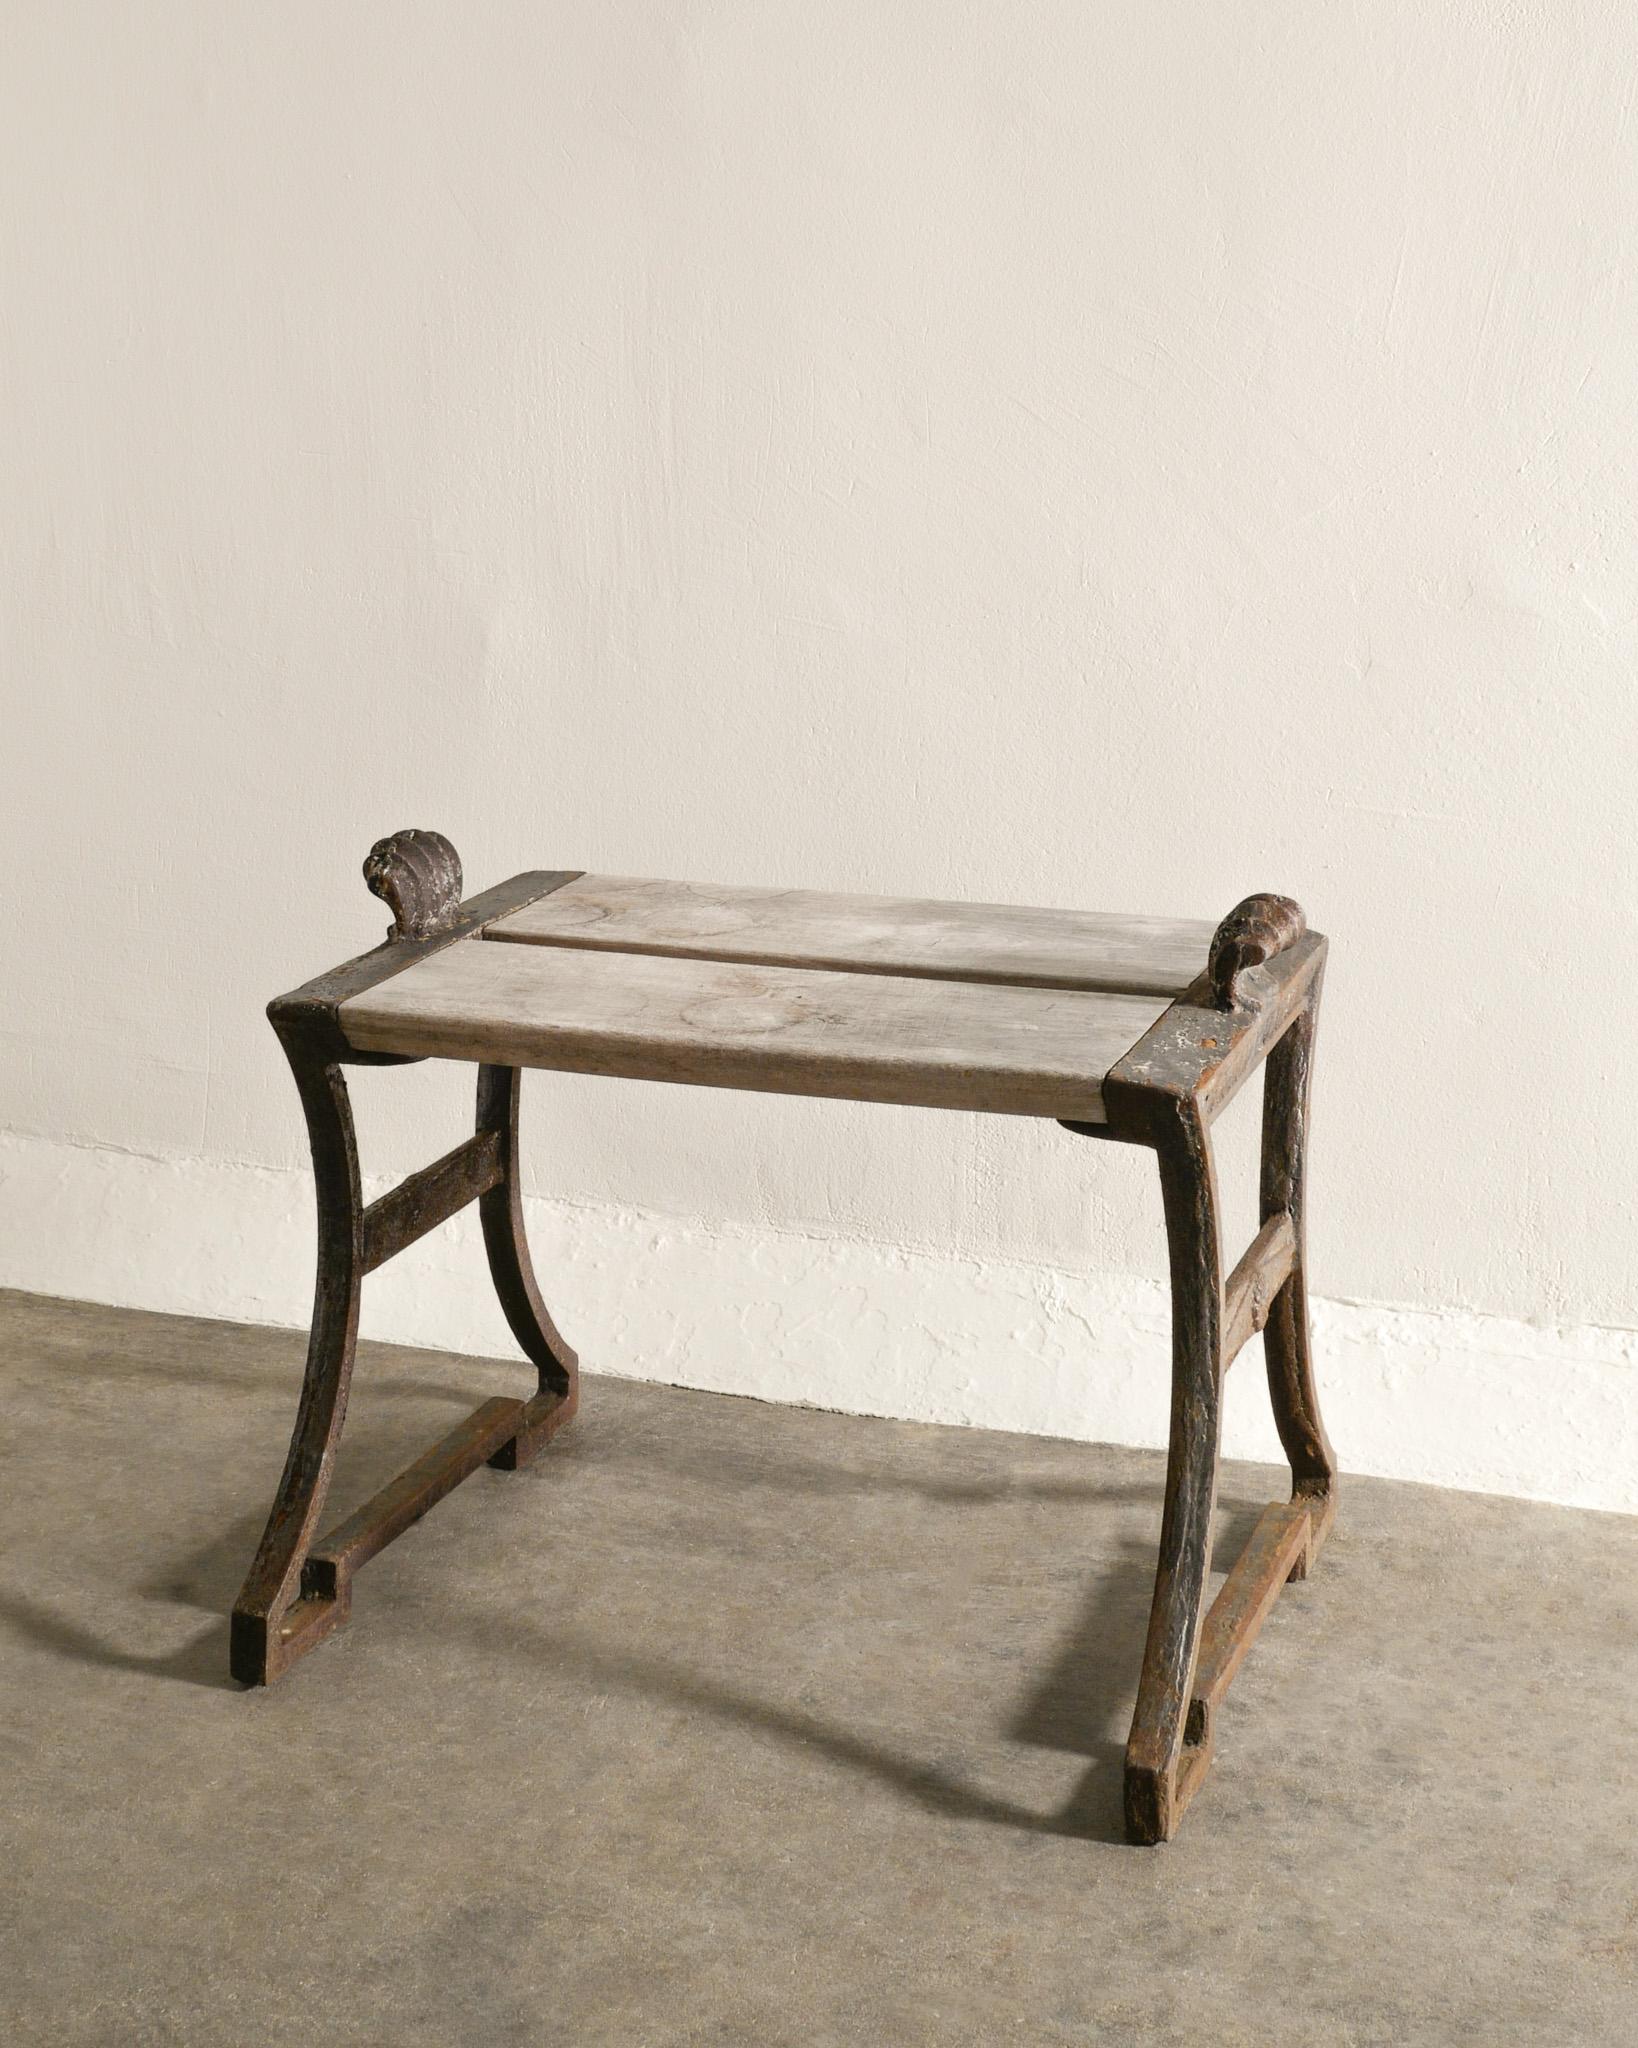 Early 20th Century Swedish Bench by Folke Bensow in Cast Iron & Pine for Näfveqvarns Bruk, 1920s For Sale